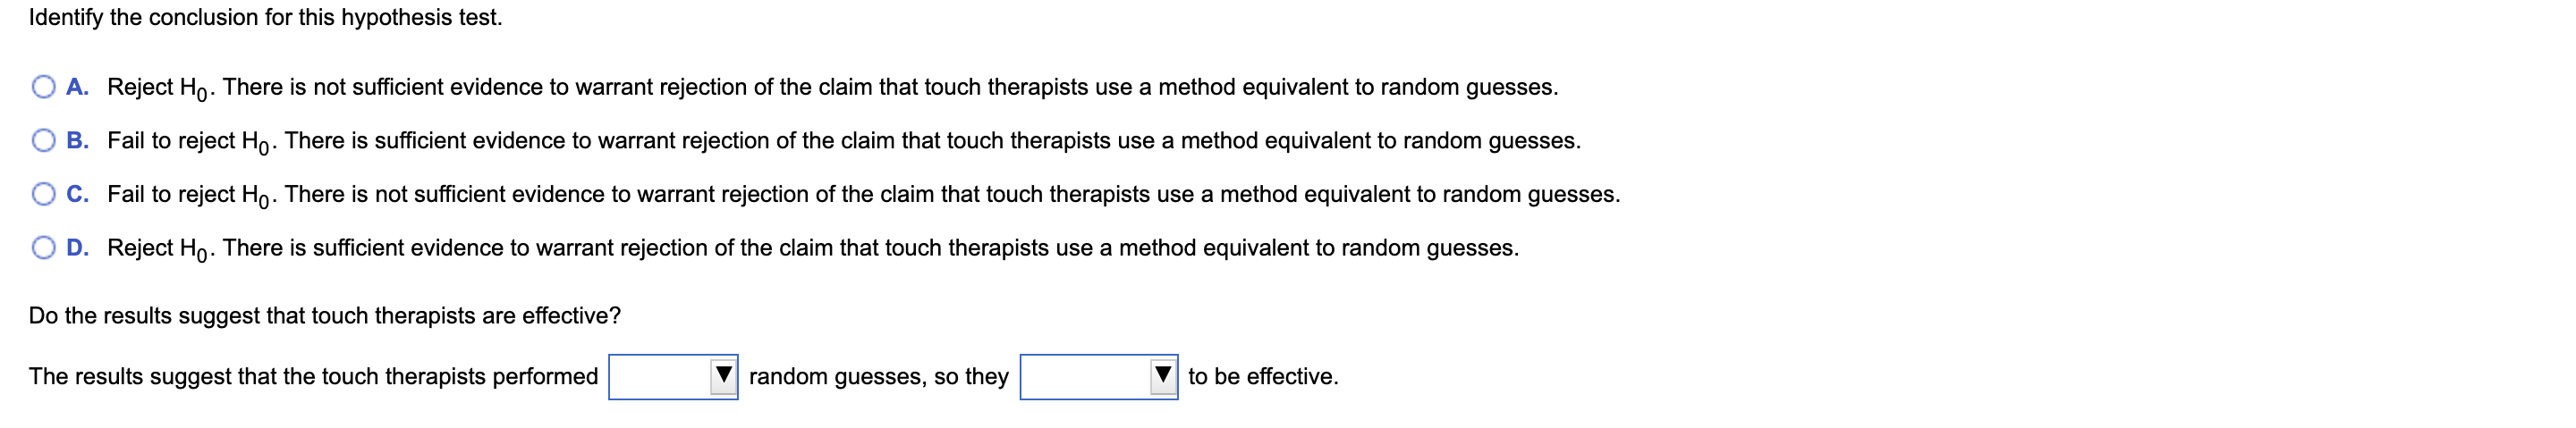 Identify the conclusion for this hypothesis test.
A. Reject Ho. There is not sufficient evidence to warrant rejection of the claim that touch therapists use a method equivalent to random guesses.
B. Fail to reject Ho. There is sufficient evidence to warrant rejection of the claim that touch therapists use a method equivalent to random guesses.
C. Fail to reject Ho. There is not sufficient evidence to warrant rejection of the claim that touch therapists use a method equivalent to random guesses.
D. Reject Ho. There is sufficient evidence to warrant rejection of the claim that touch therapists use a method equivalent to random guesses.
Do the results suggest that touch therapists are effective?
random guesses, so they
The results suggest that the touch therapists performed
to be effective.
